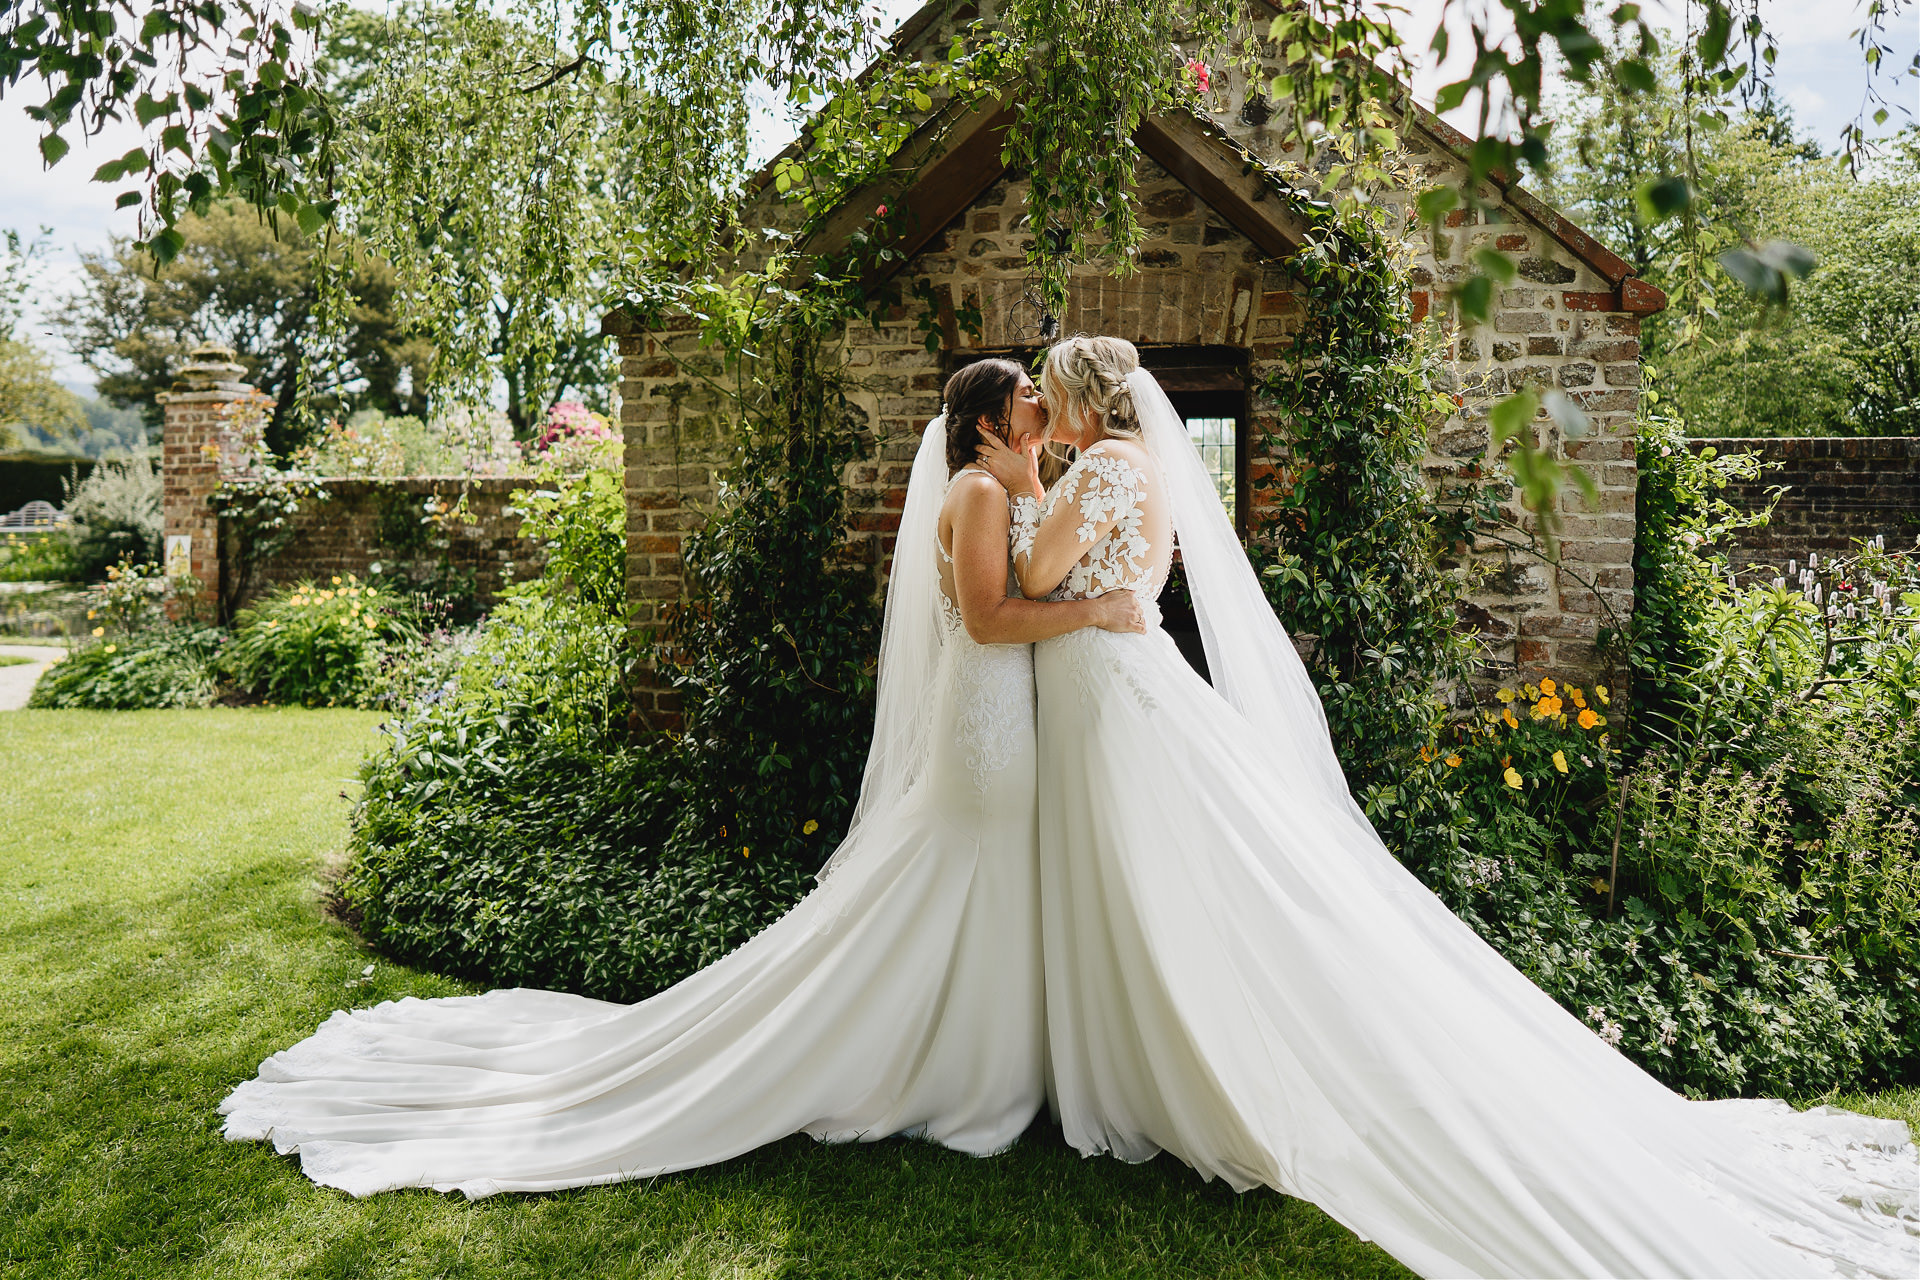 Bride and bride just married first kiss in a beautiful garden setting